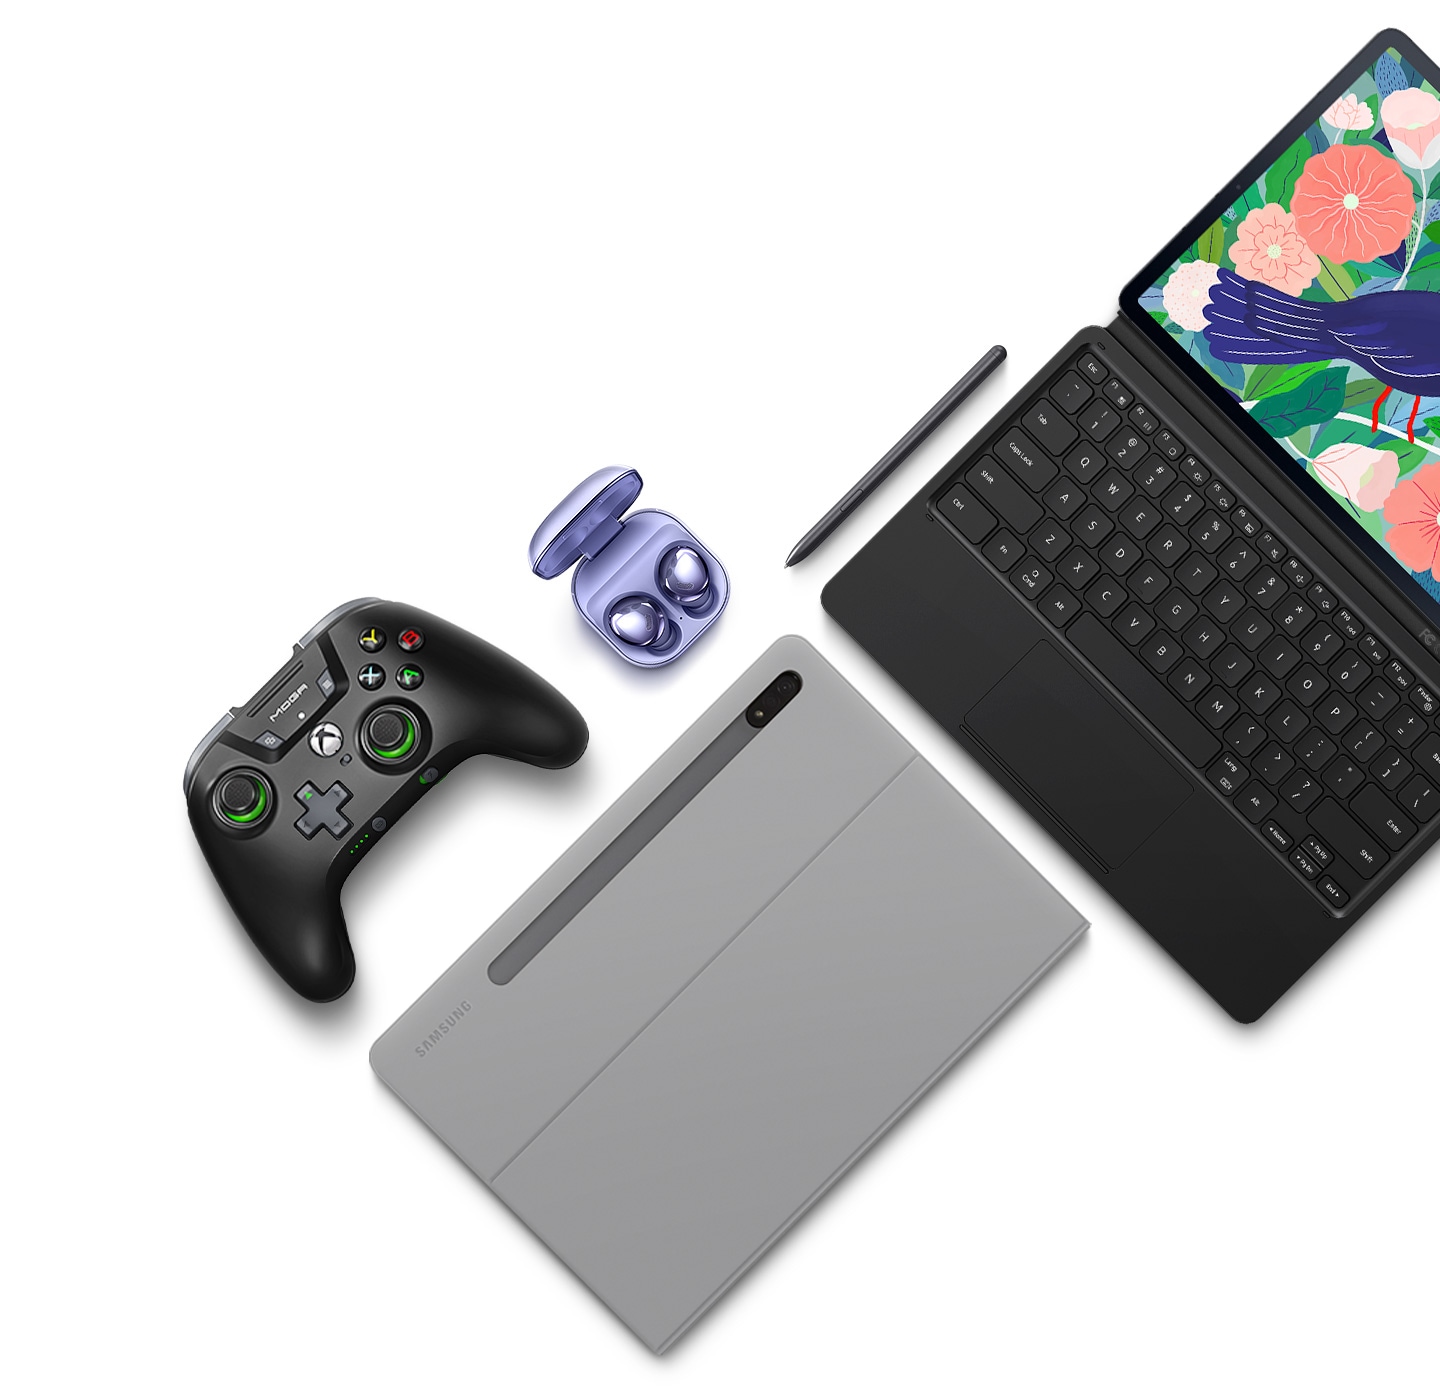 Flat lay of Galaxy Tab S7+ and its accessories. A Galaxy Tab S7+ attached to the BookCover Keyboard, a Galaxy Tab S7+ inside the BookCover, S Pen, game controller, and Galaxy Buds Pro